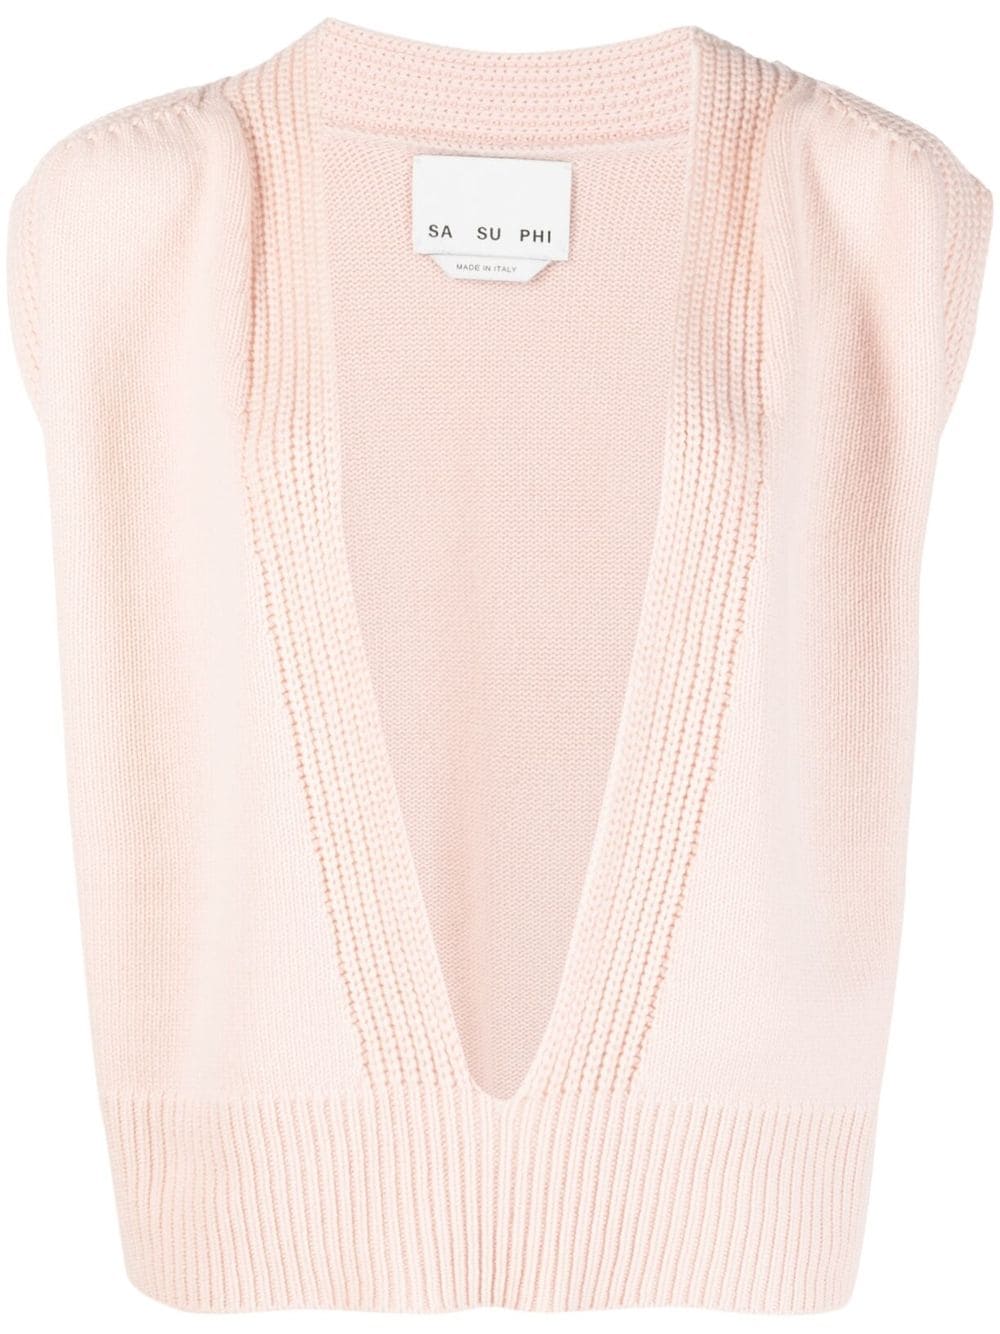 Sa Su Phi Plunging V-neck Cashmere Top In Pink